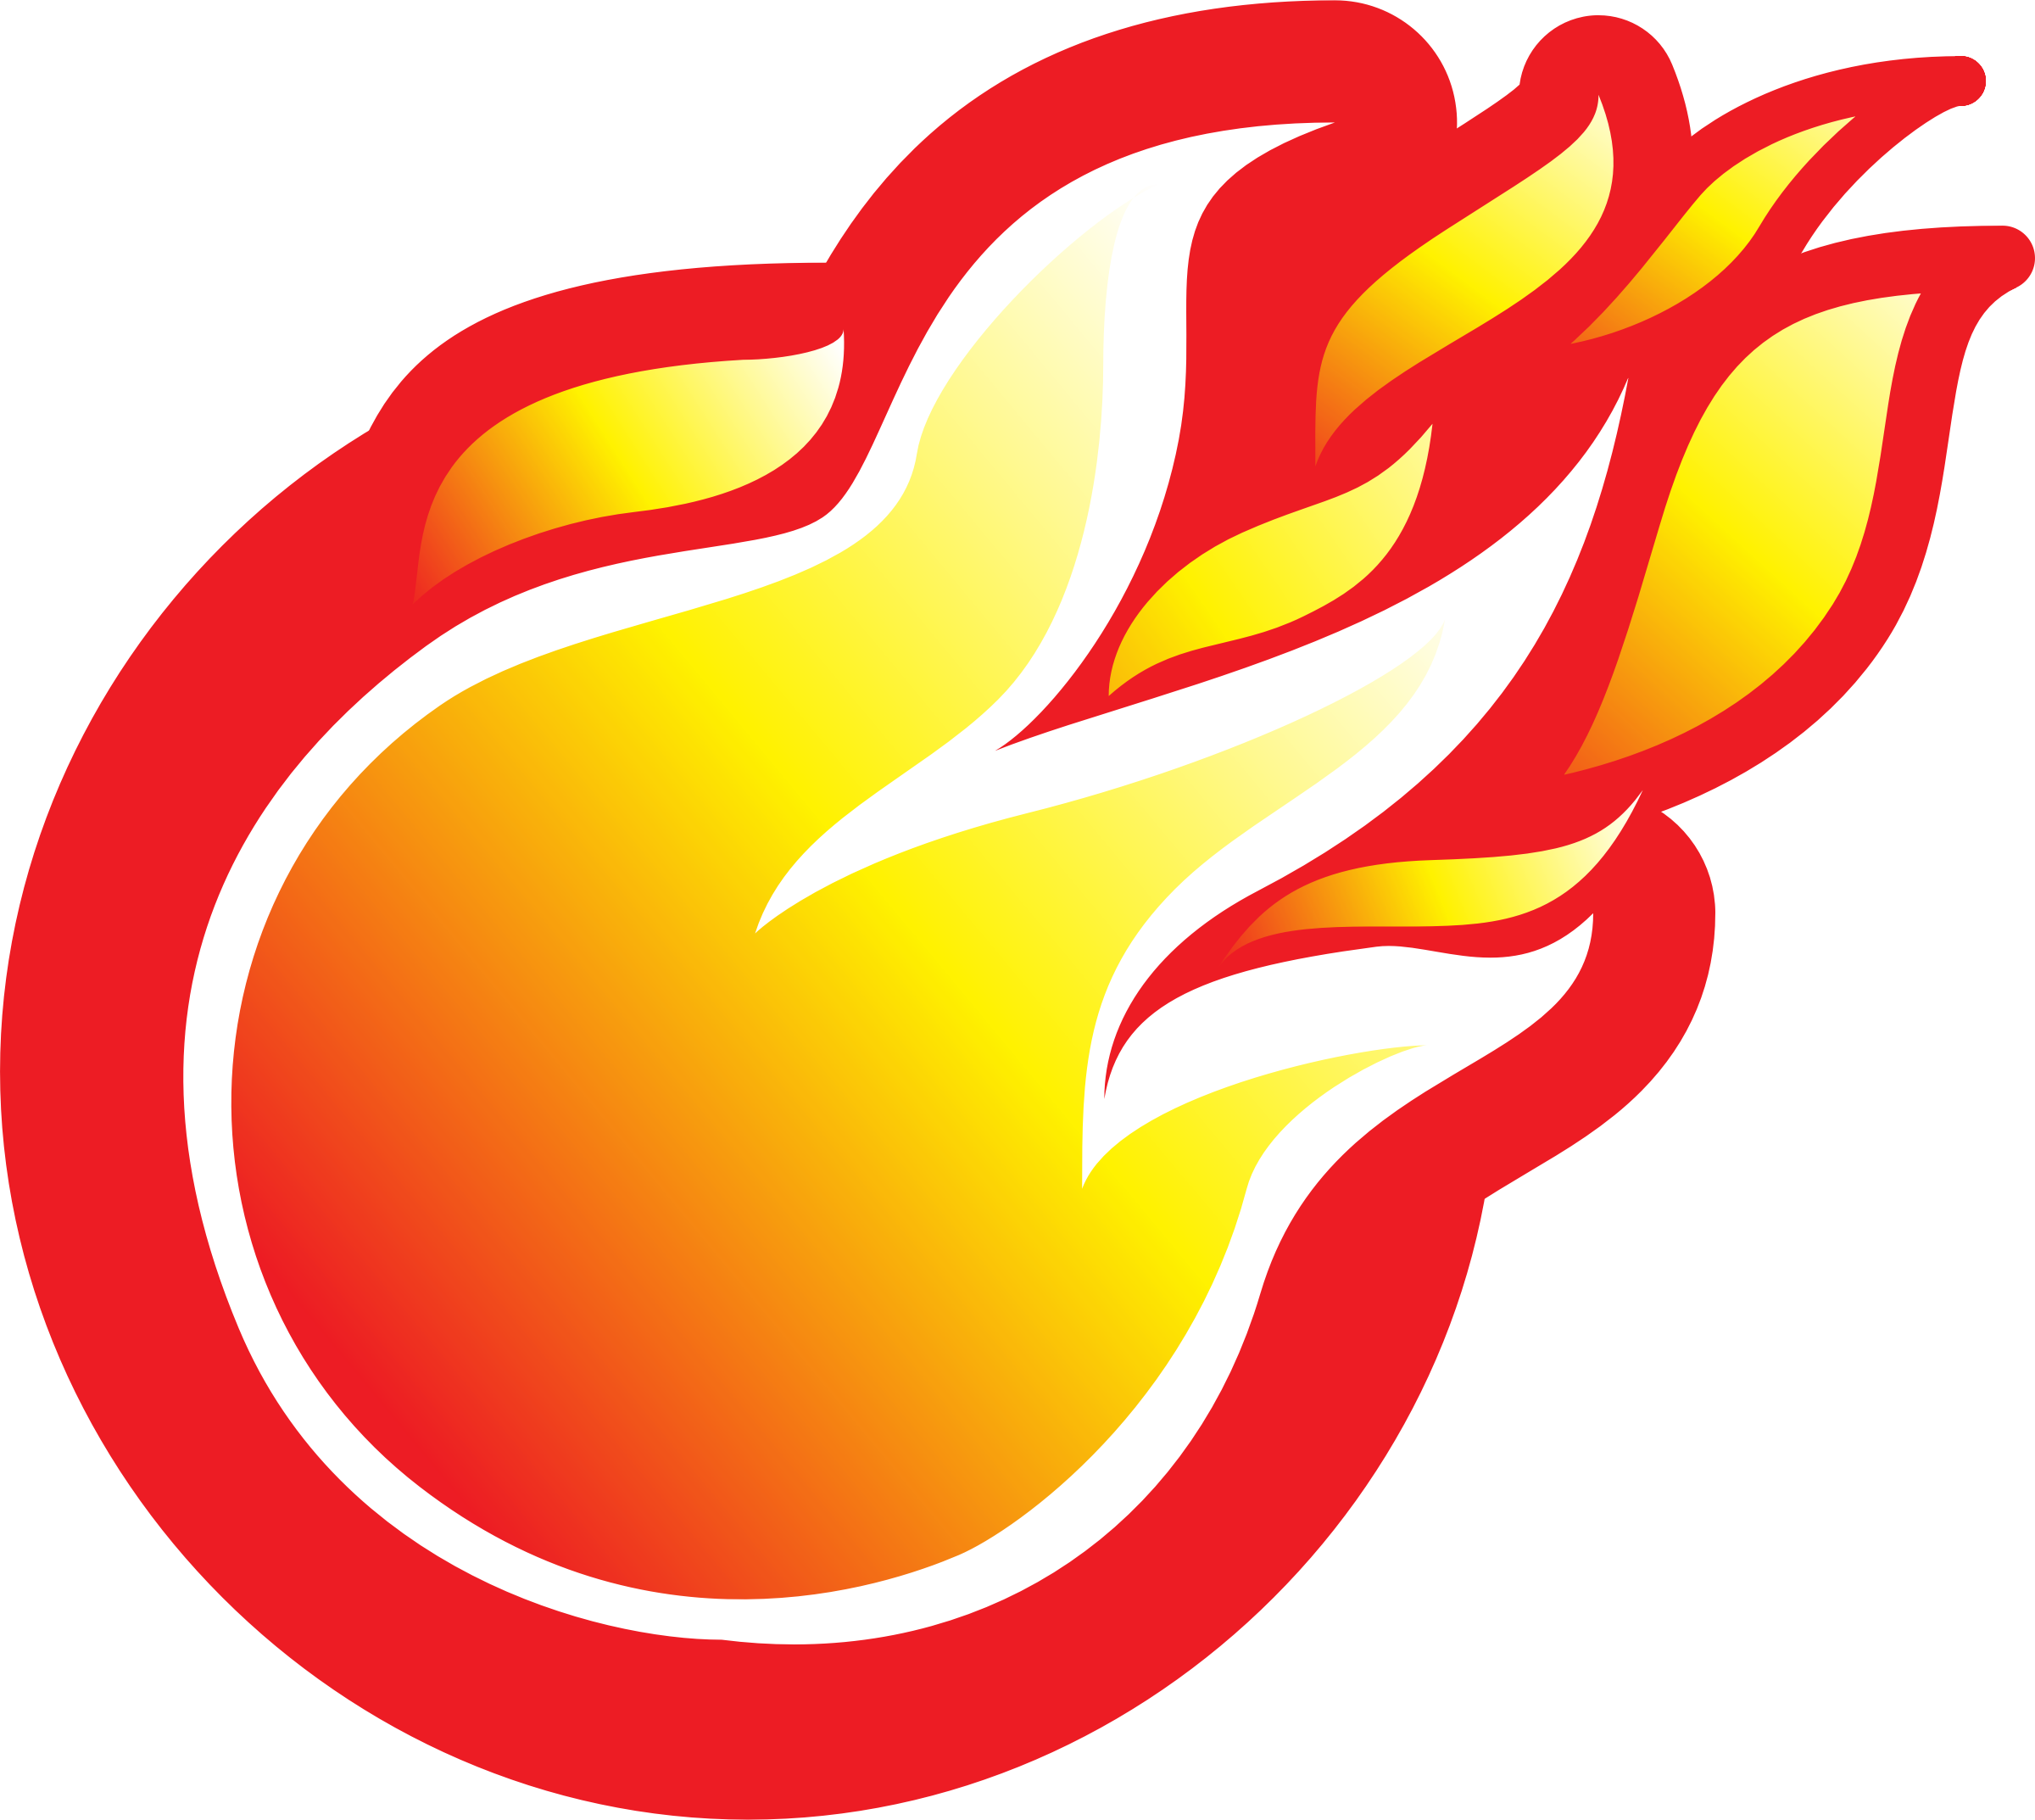 Flames flame clip art vector flame graphics image 4 2 - dbclipart.com